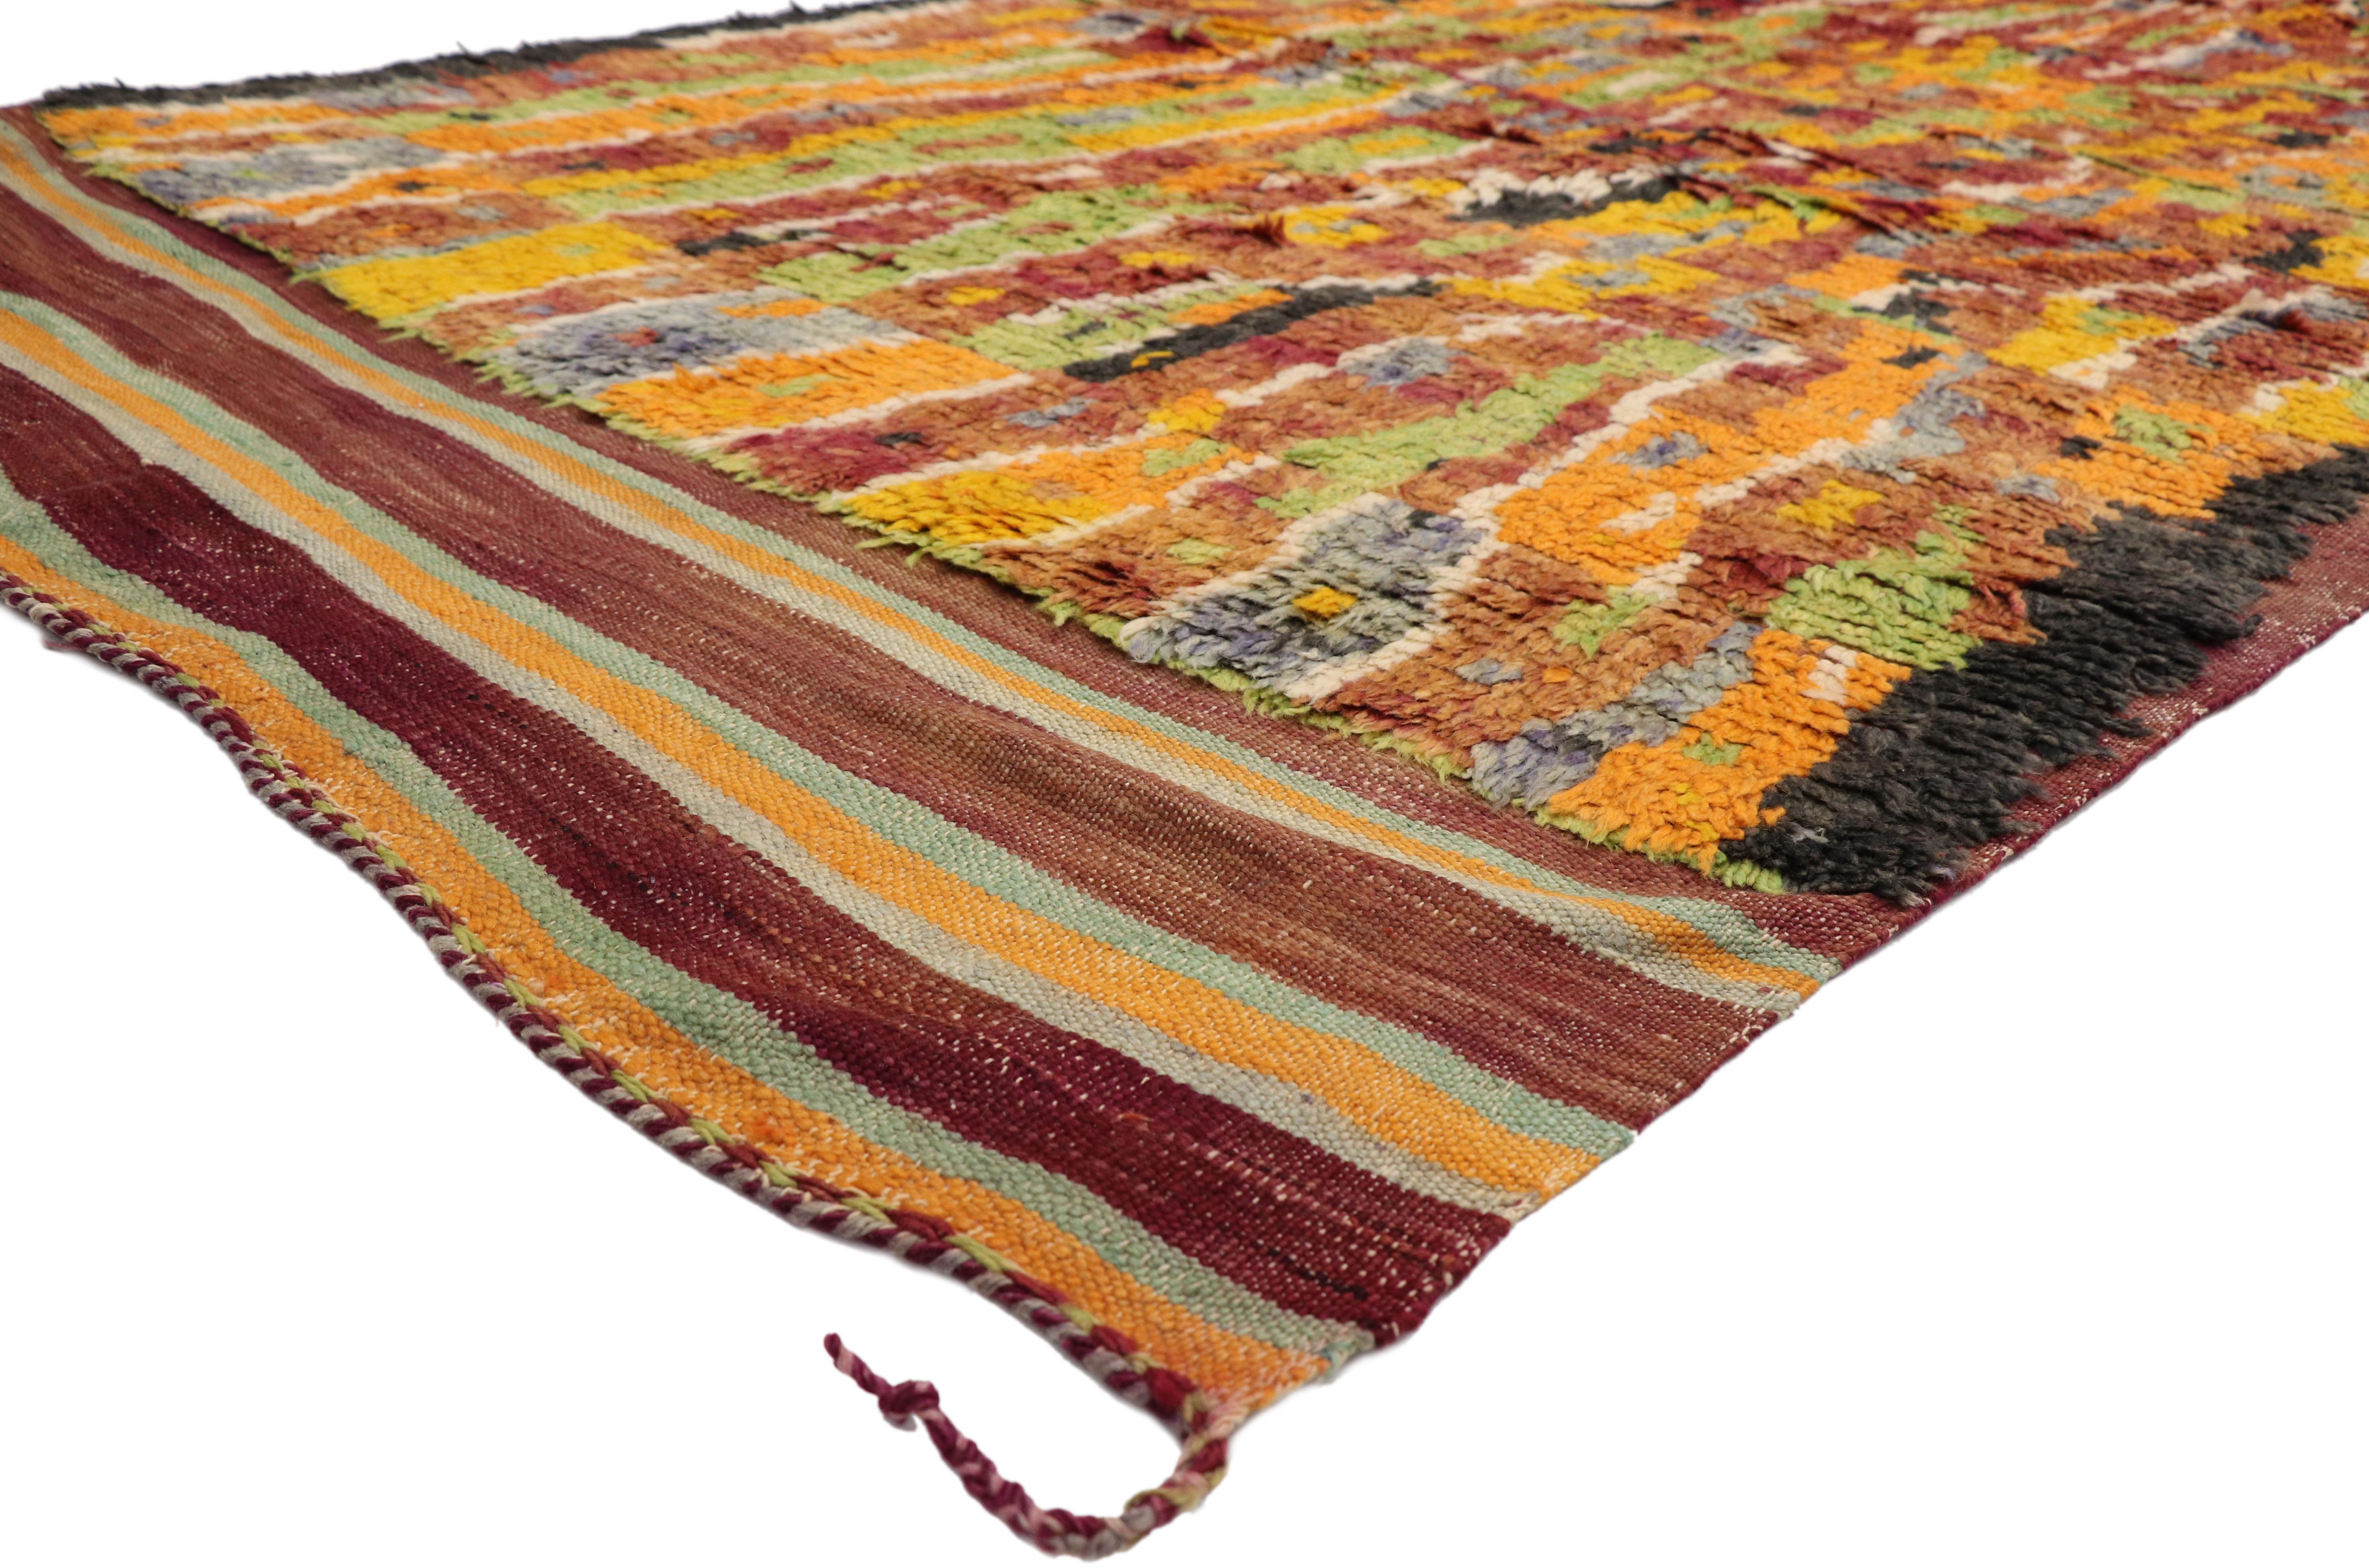 20900, vintage Ait Bou Ichaouen Moroccan Berber rug. Displaying asymmetrical spontaneity, emotional energy, and bursting with poly-chromatic brilliancy this hand knotted wool vintage Moroccan Ait Bou Ichaouen rug beautifully embodies Contemporary